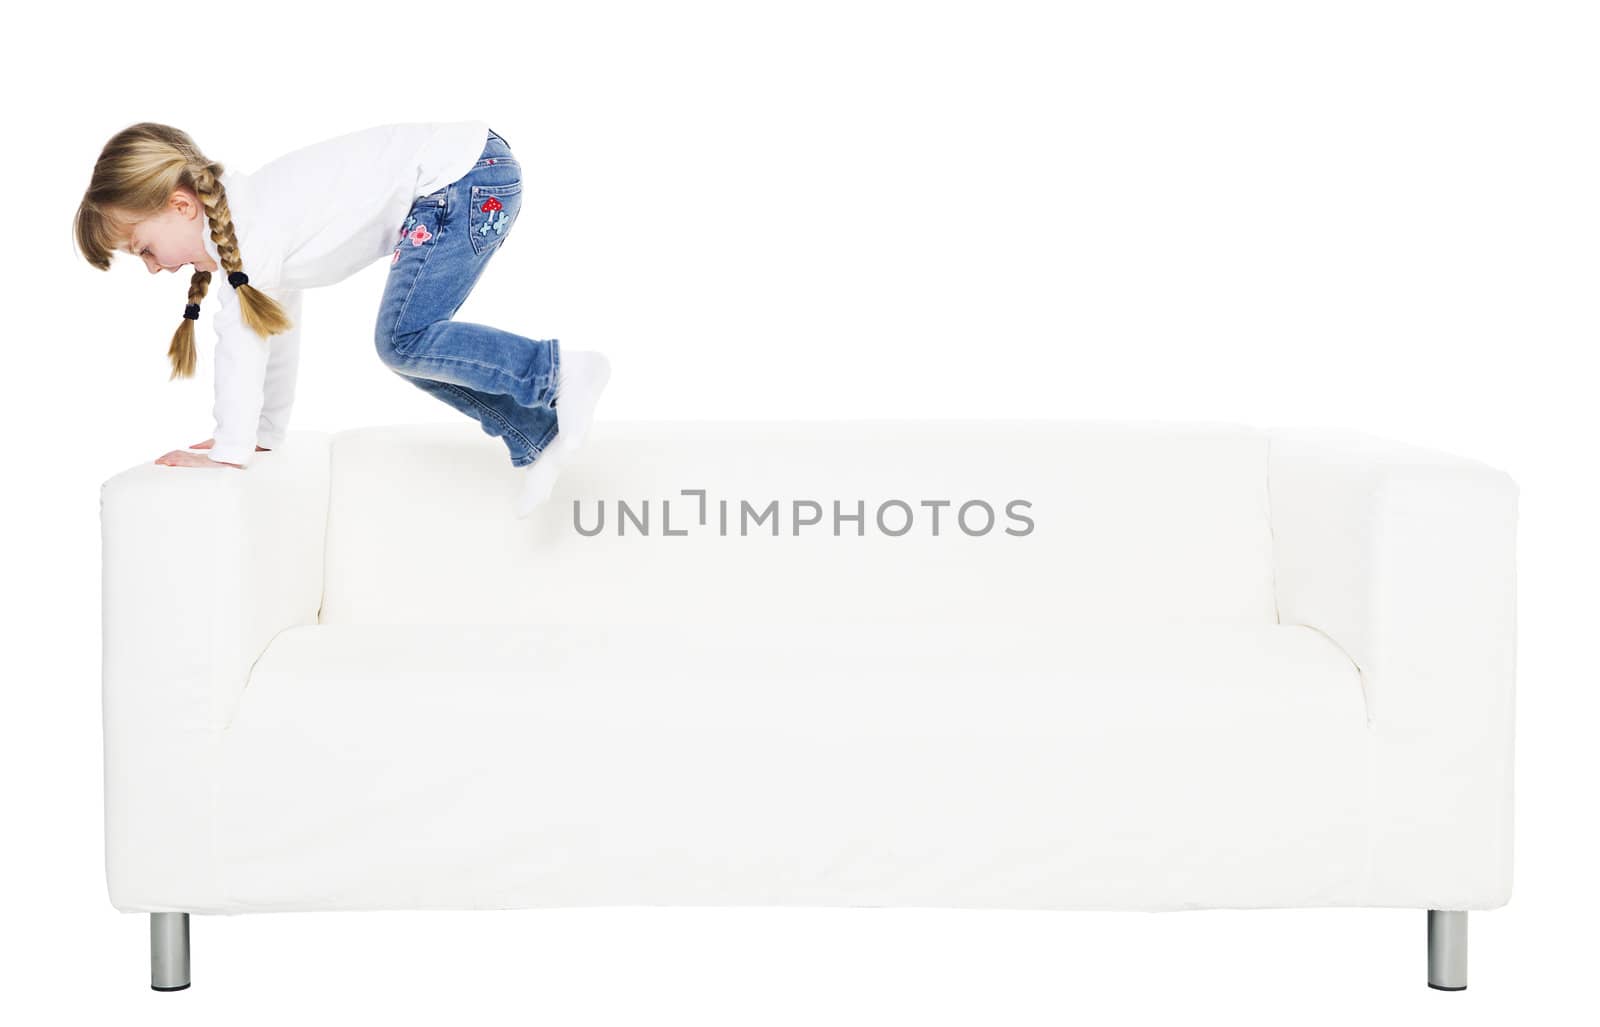 Young girl in a sofa isolated on white background